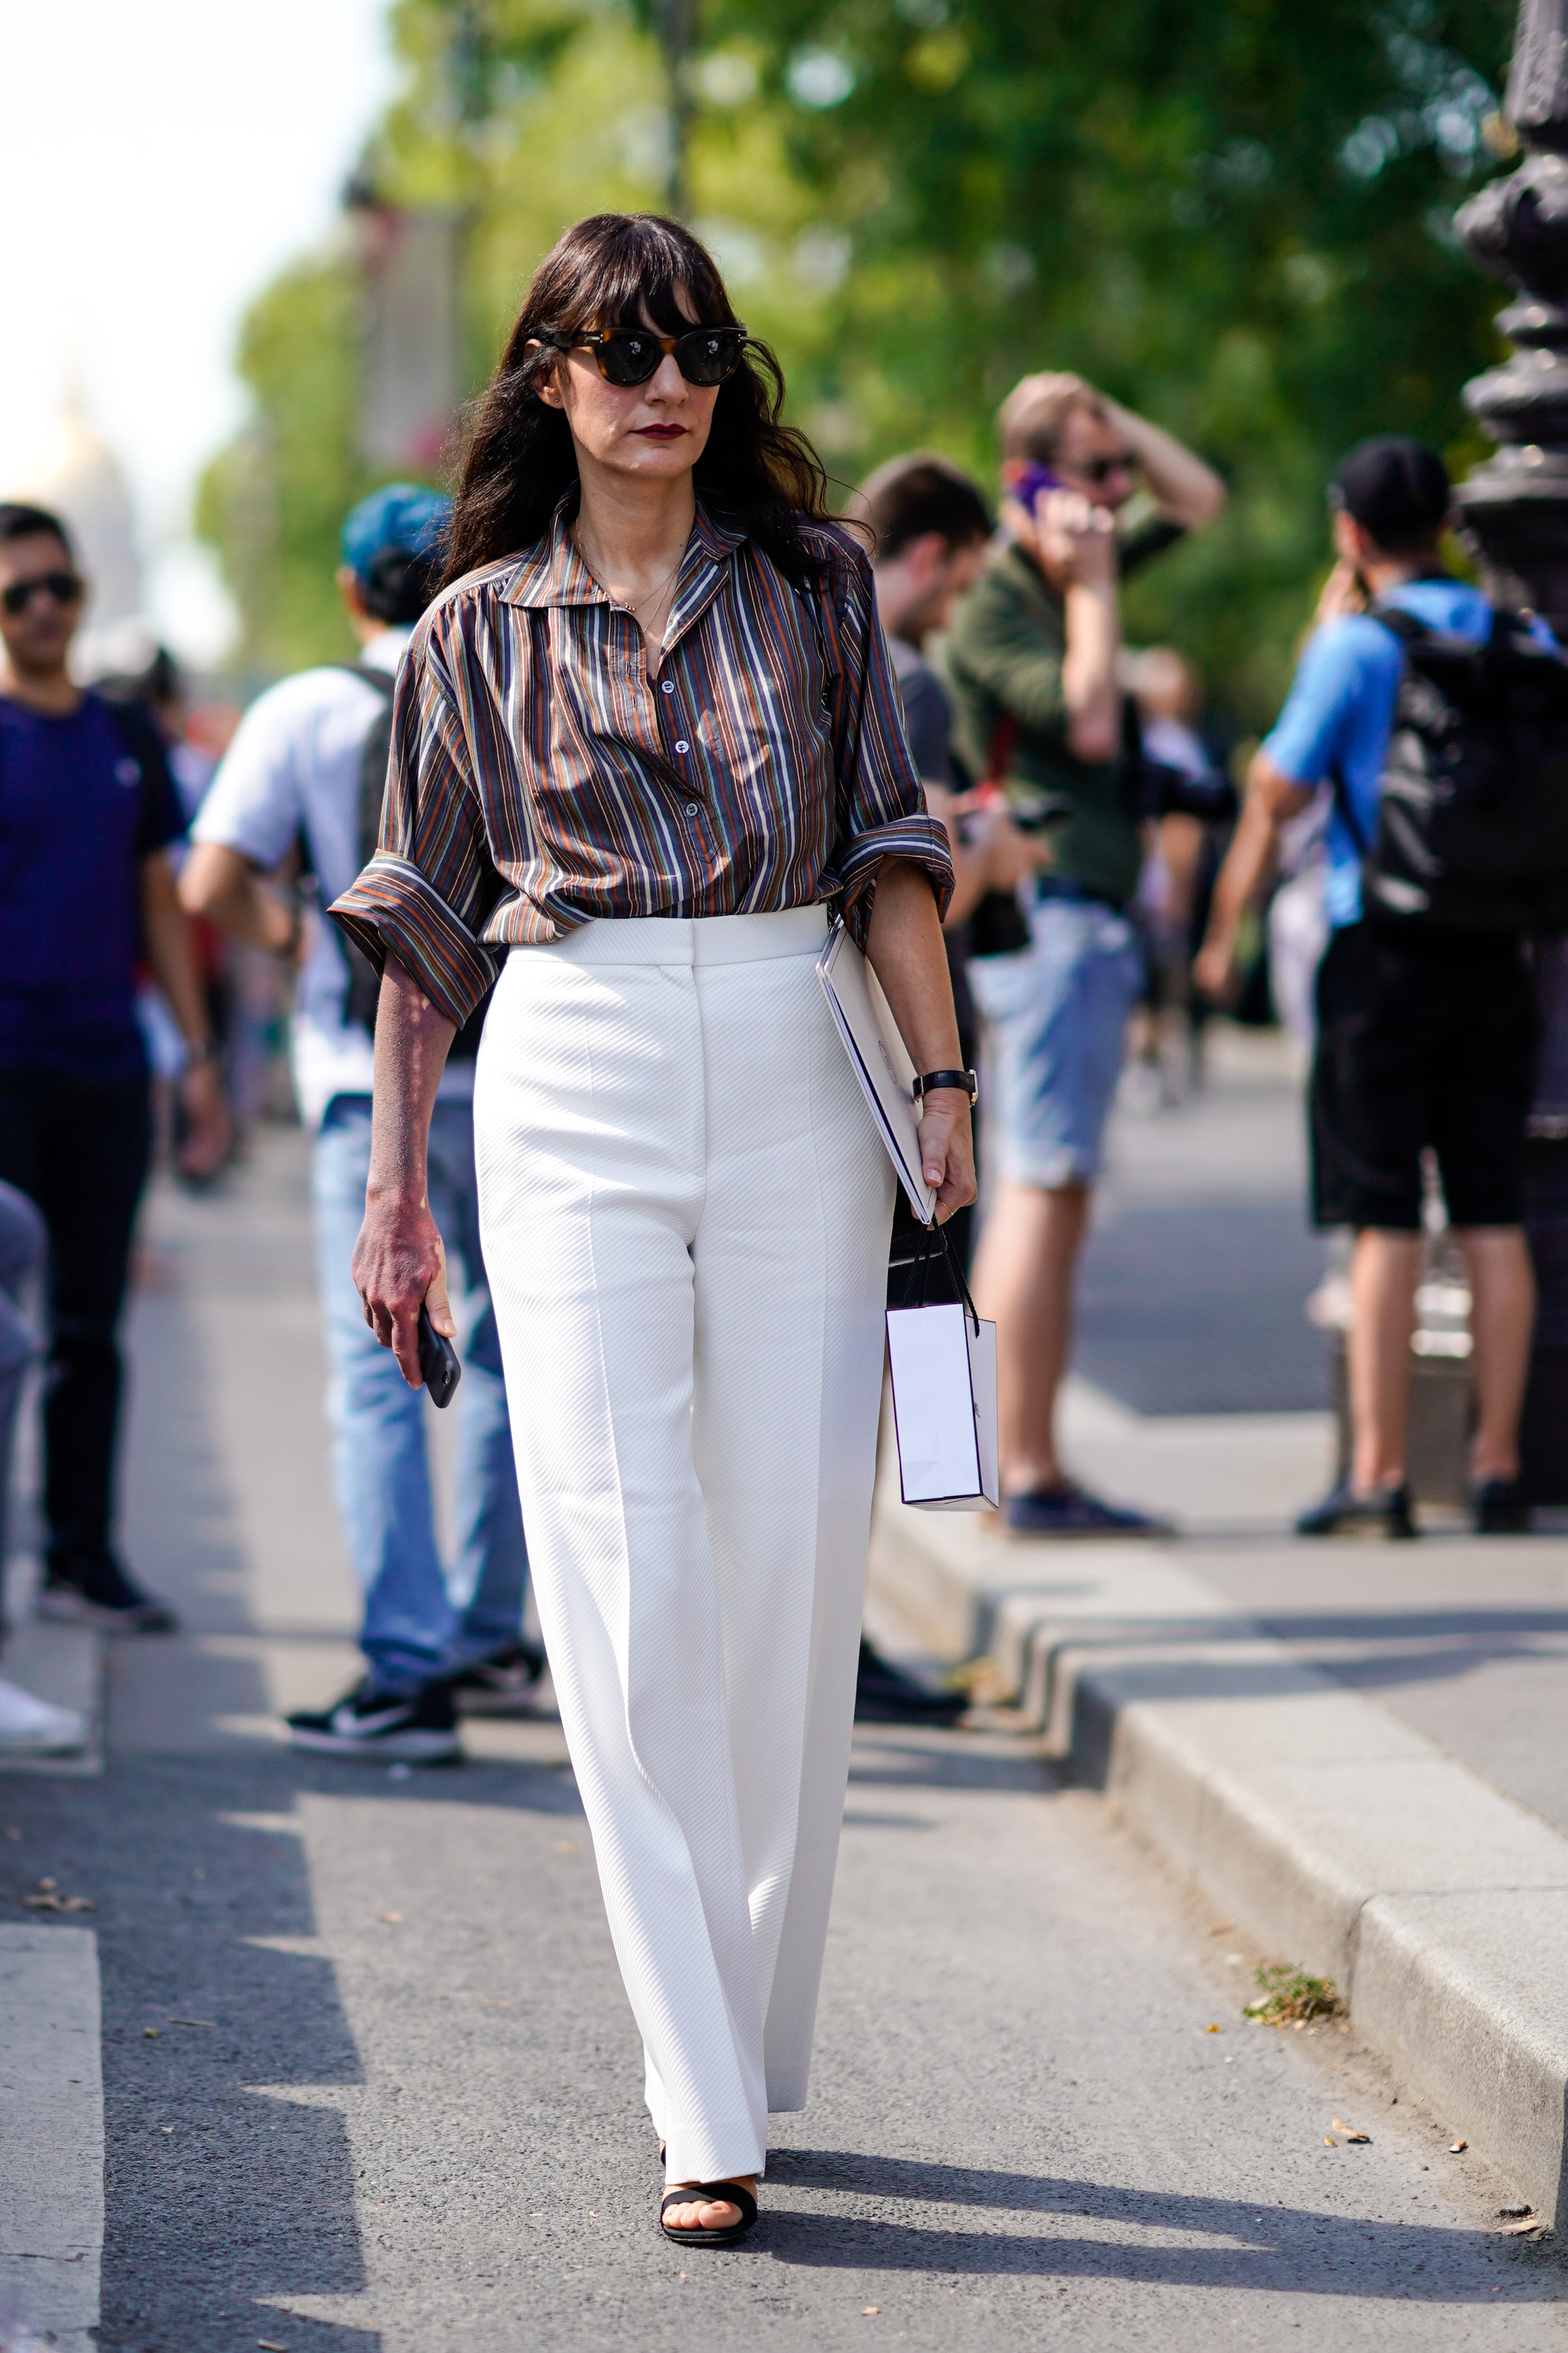 How to Wear High-Waisted Pants – 21 Dos and Don'ts